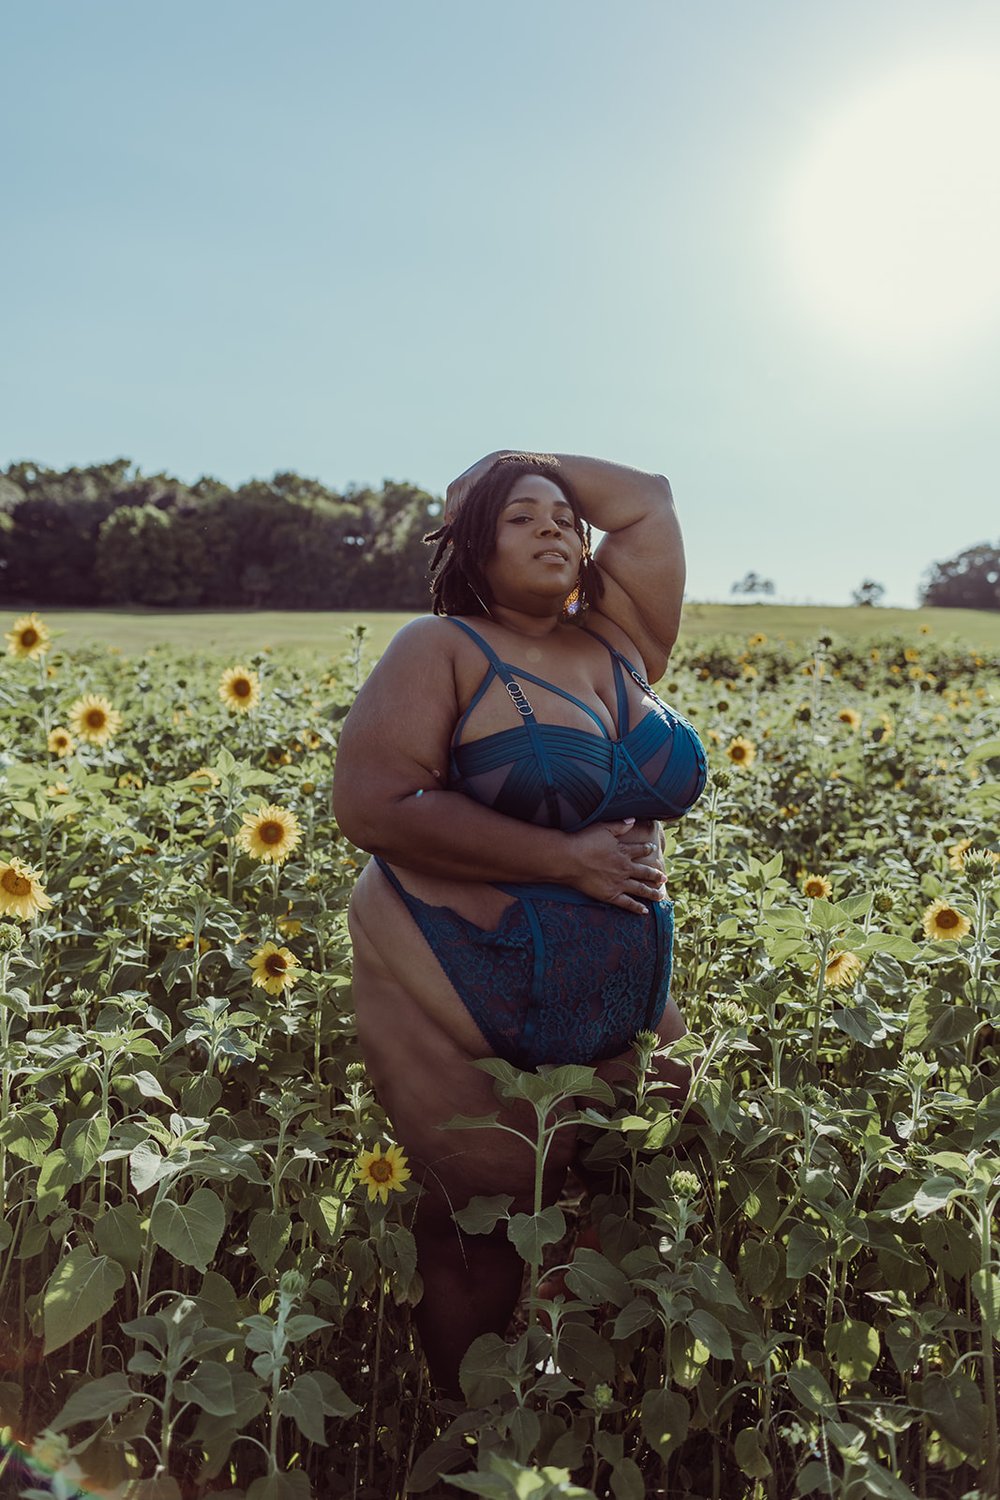  woman standing in a sunflower field gives the camera a sultry gaze during her outdoor boudoir photoshoot in Florida 